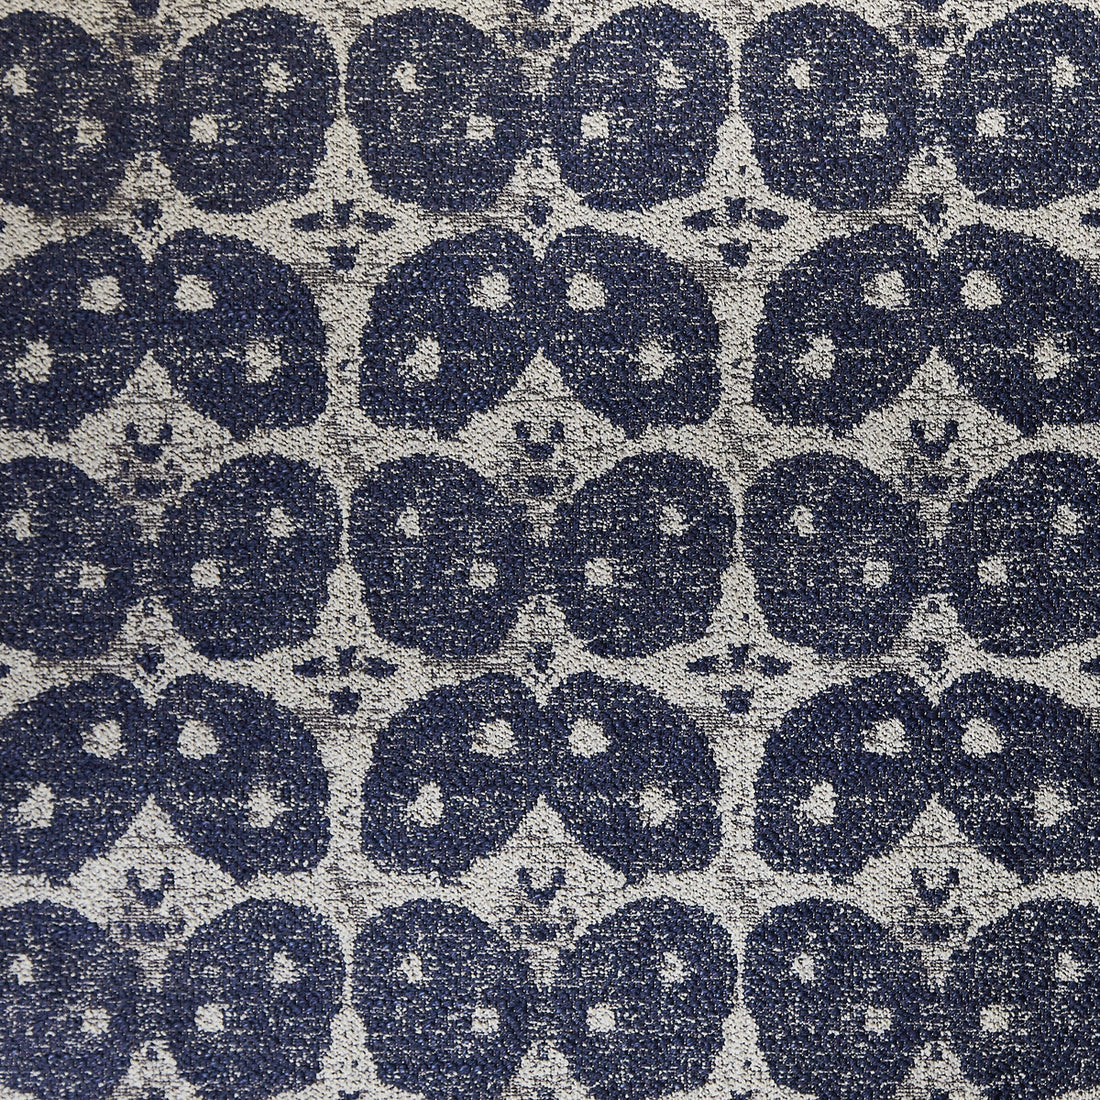 Panarea fabric in midnight blue color - pattern GWF-3201.50.0 - by Lee Jofa Modern in the Allegra Hicks Islands collection